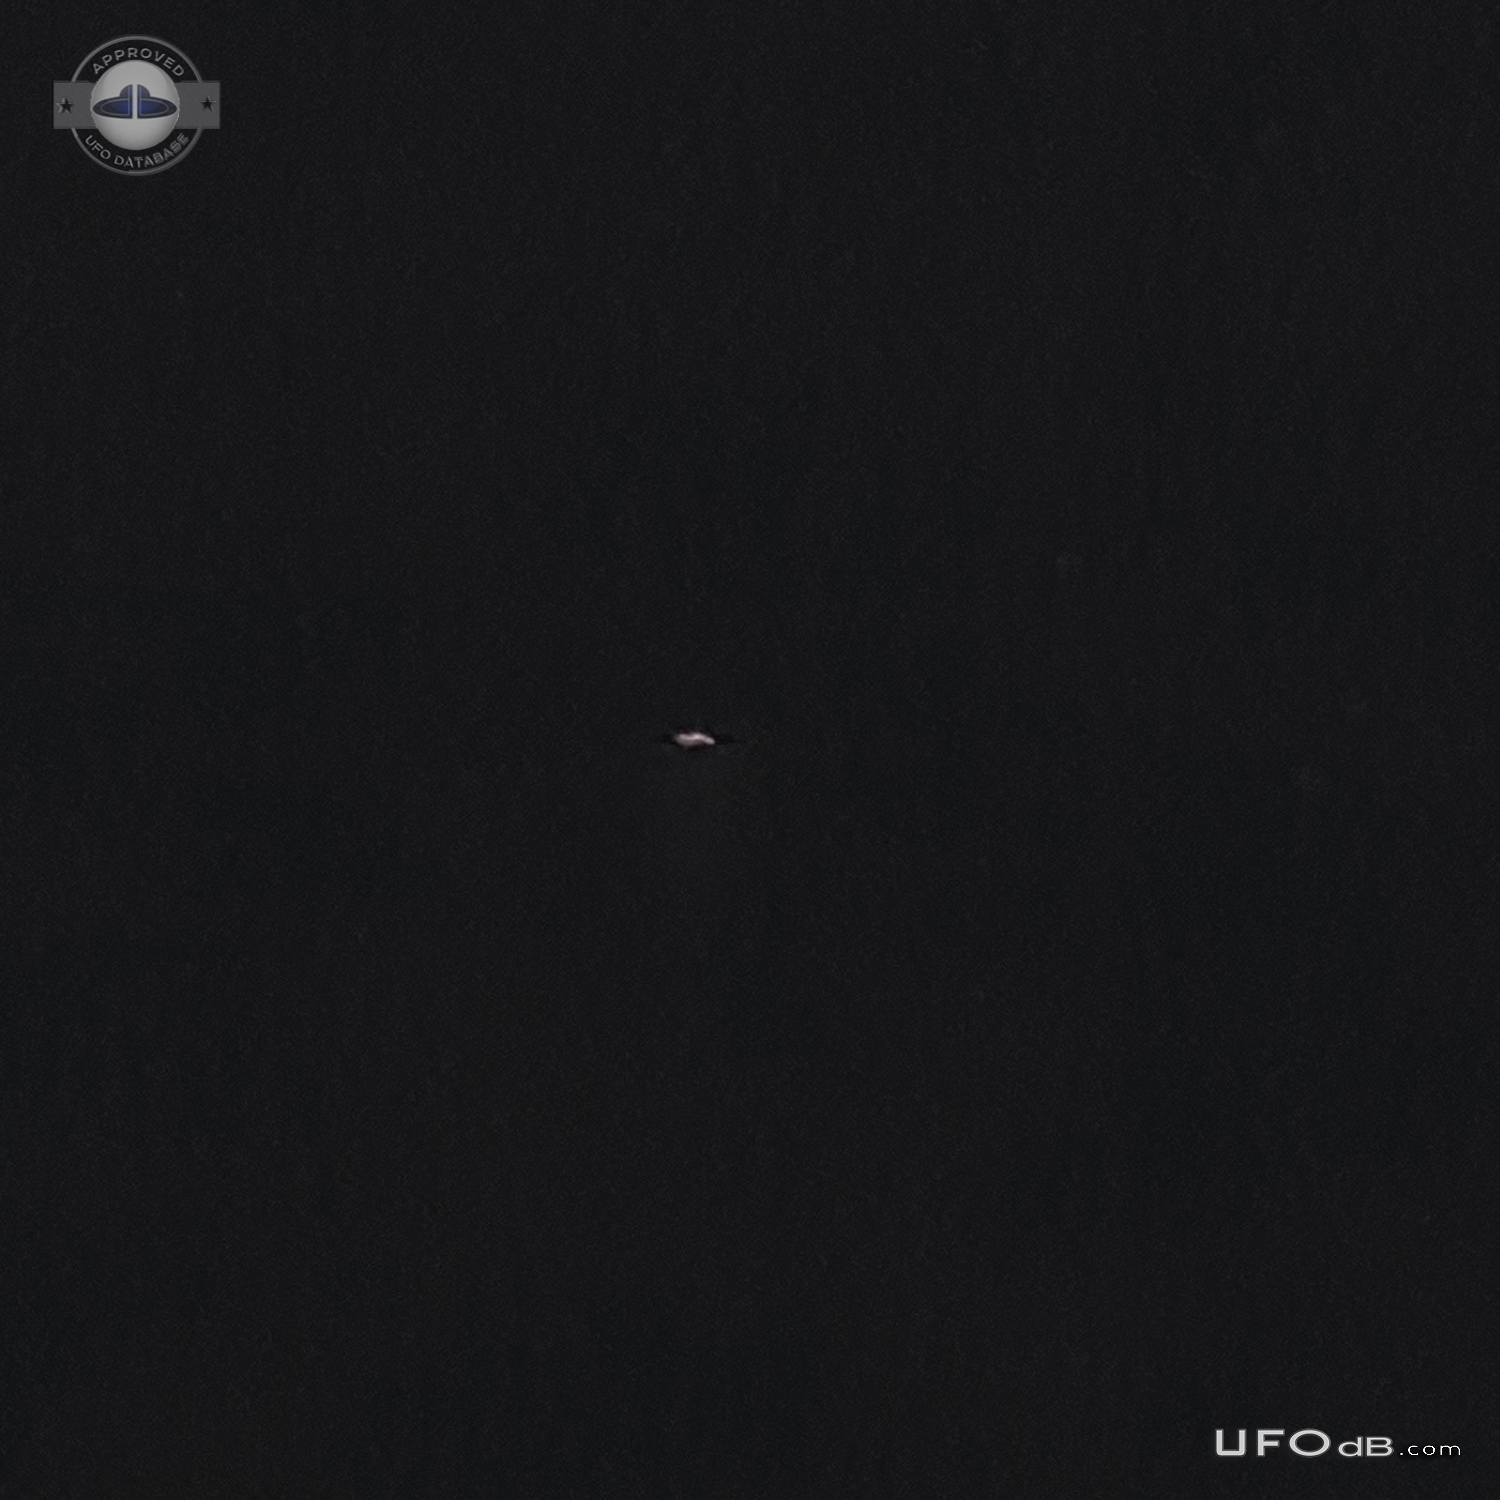 Observed bright light in sky approaching, light went out as aircraft a UFO Picture #769-3